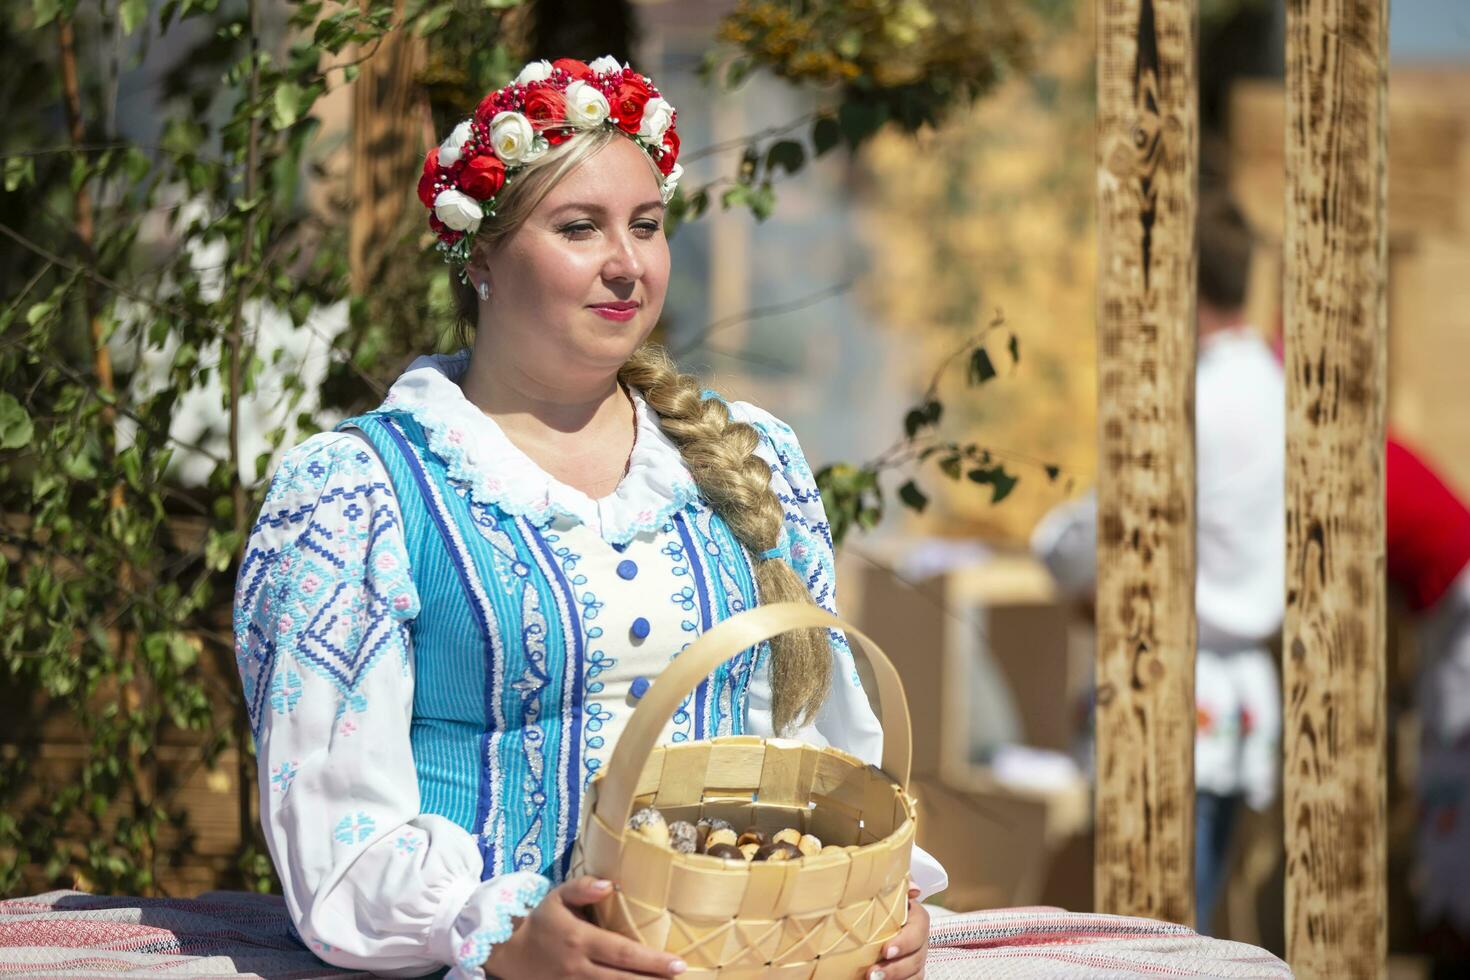 08 29 2020 Belarus, Lyaskovichi. Holiday in the city.Beautiful plump Slavic woman in an embroidered shirt and a wreath with a braid.Russian or Belarusian ethnic woman. photo